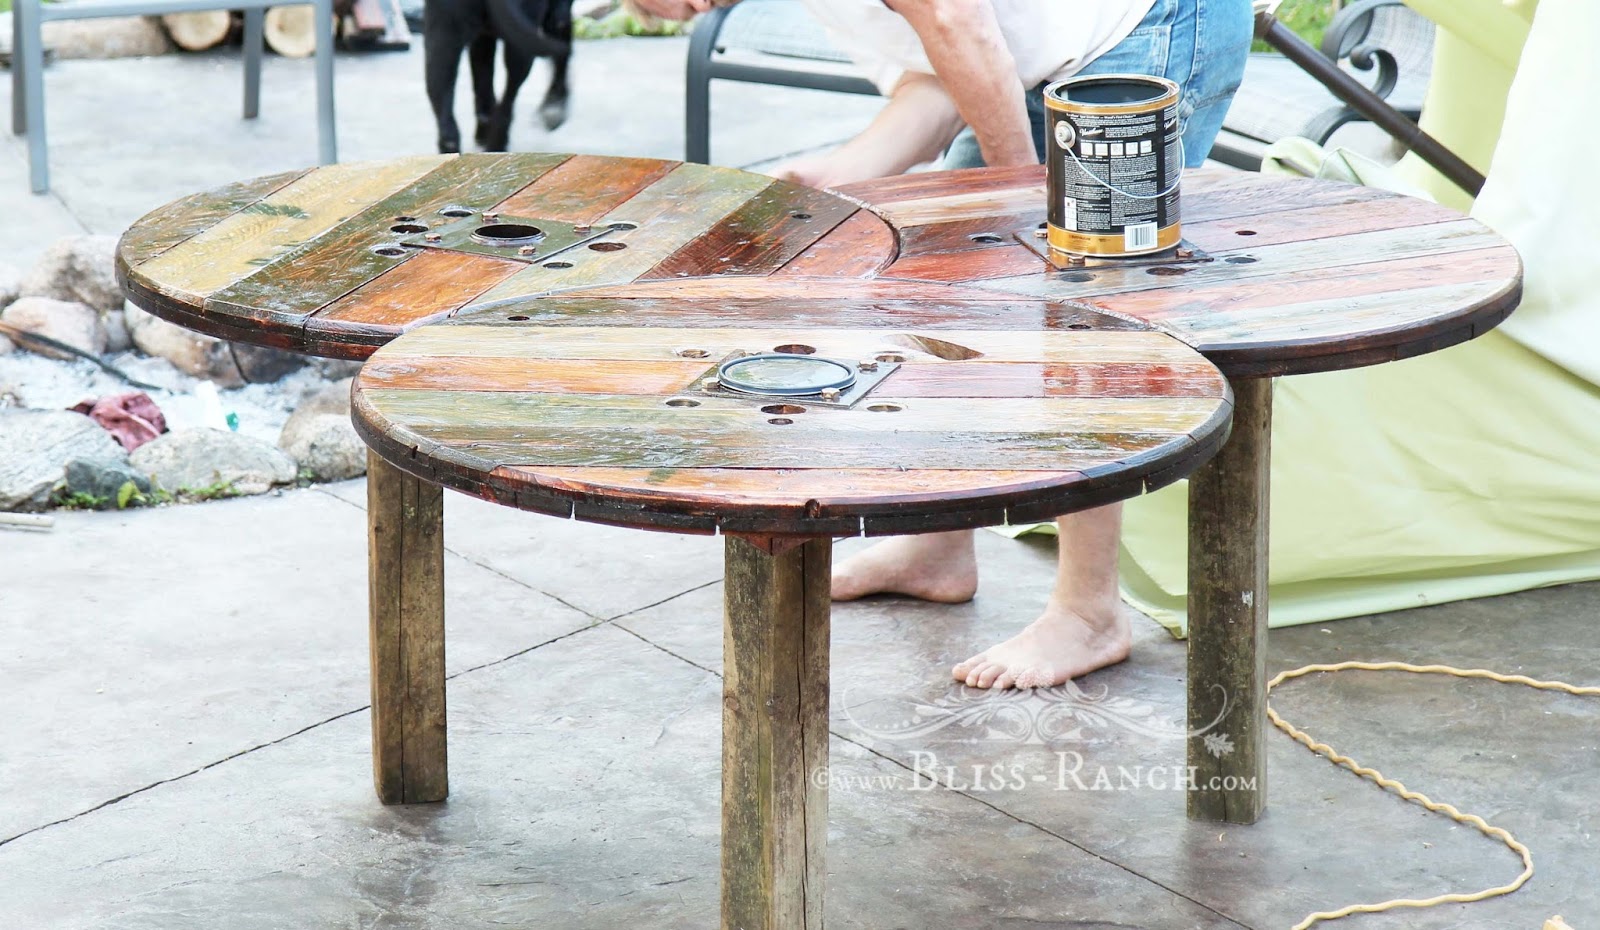 Bliss-Ranch Wood Spool Table